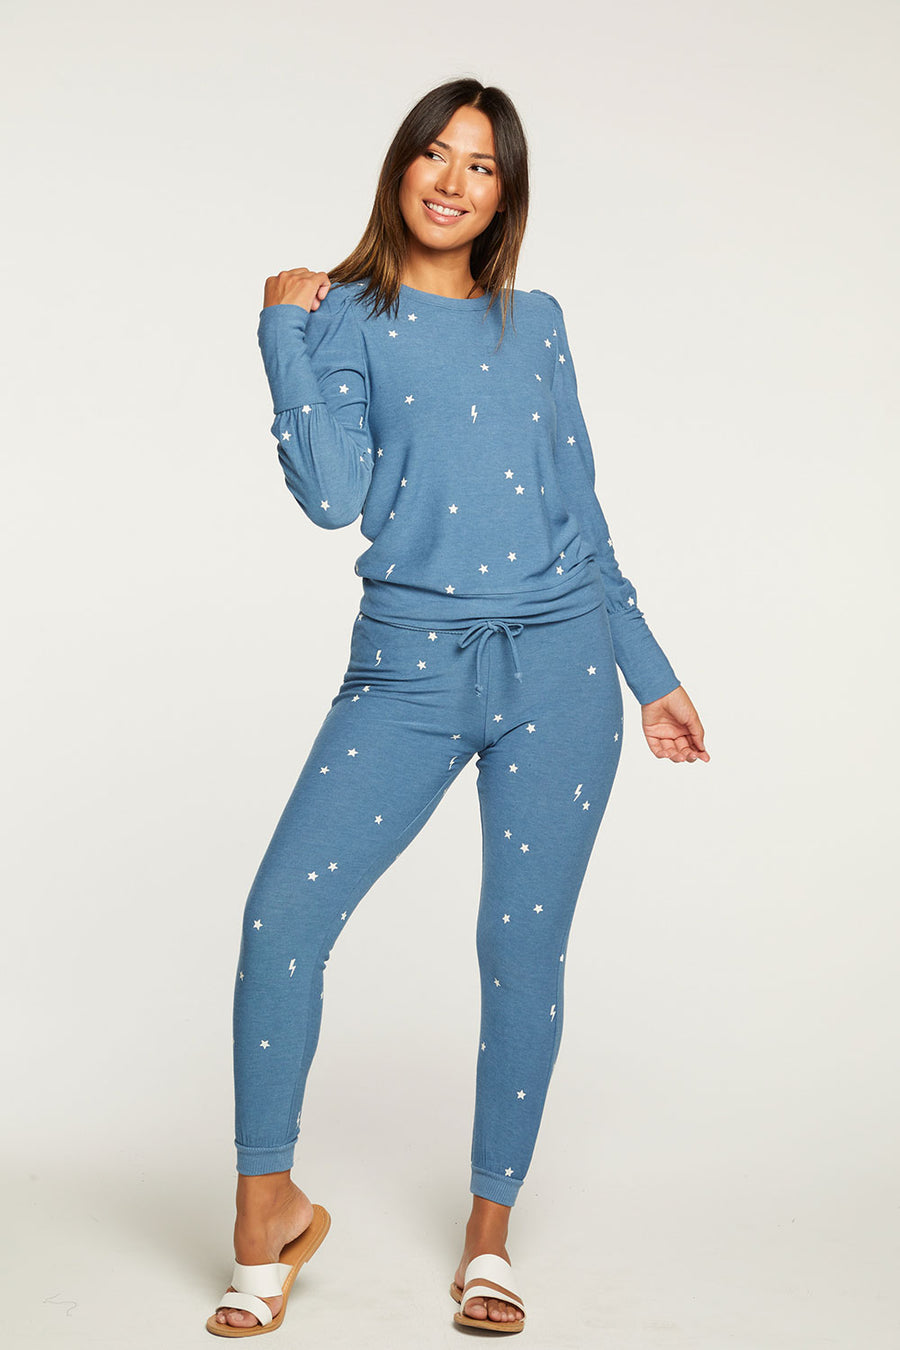 Starry Bolts WOMENS - chaserbrand